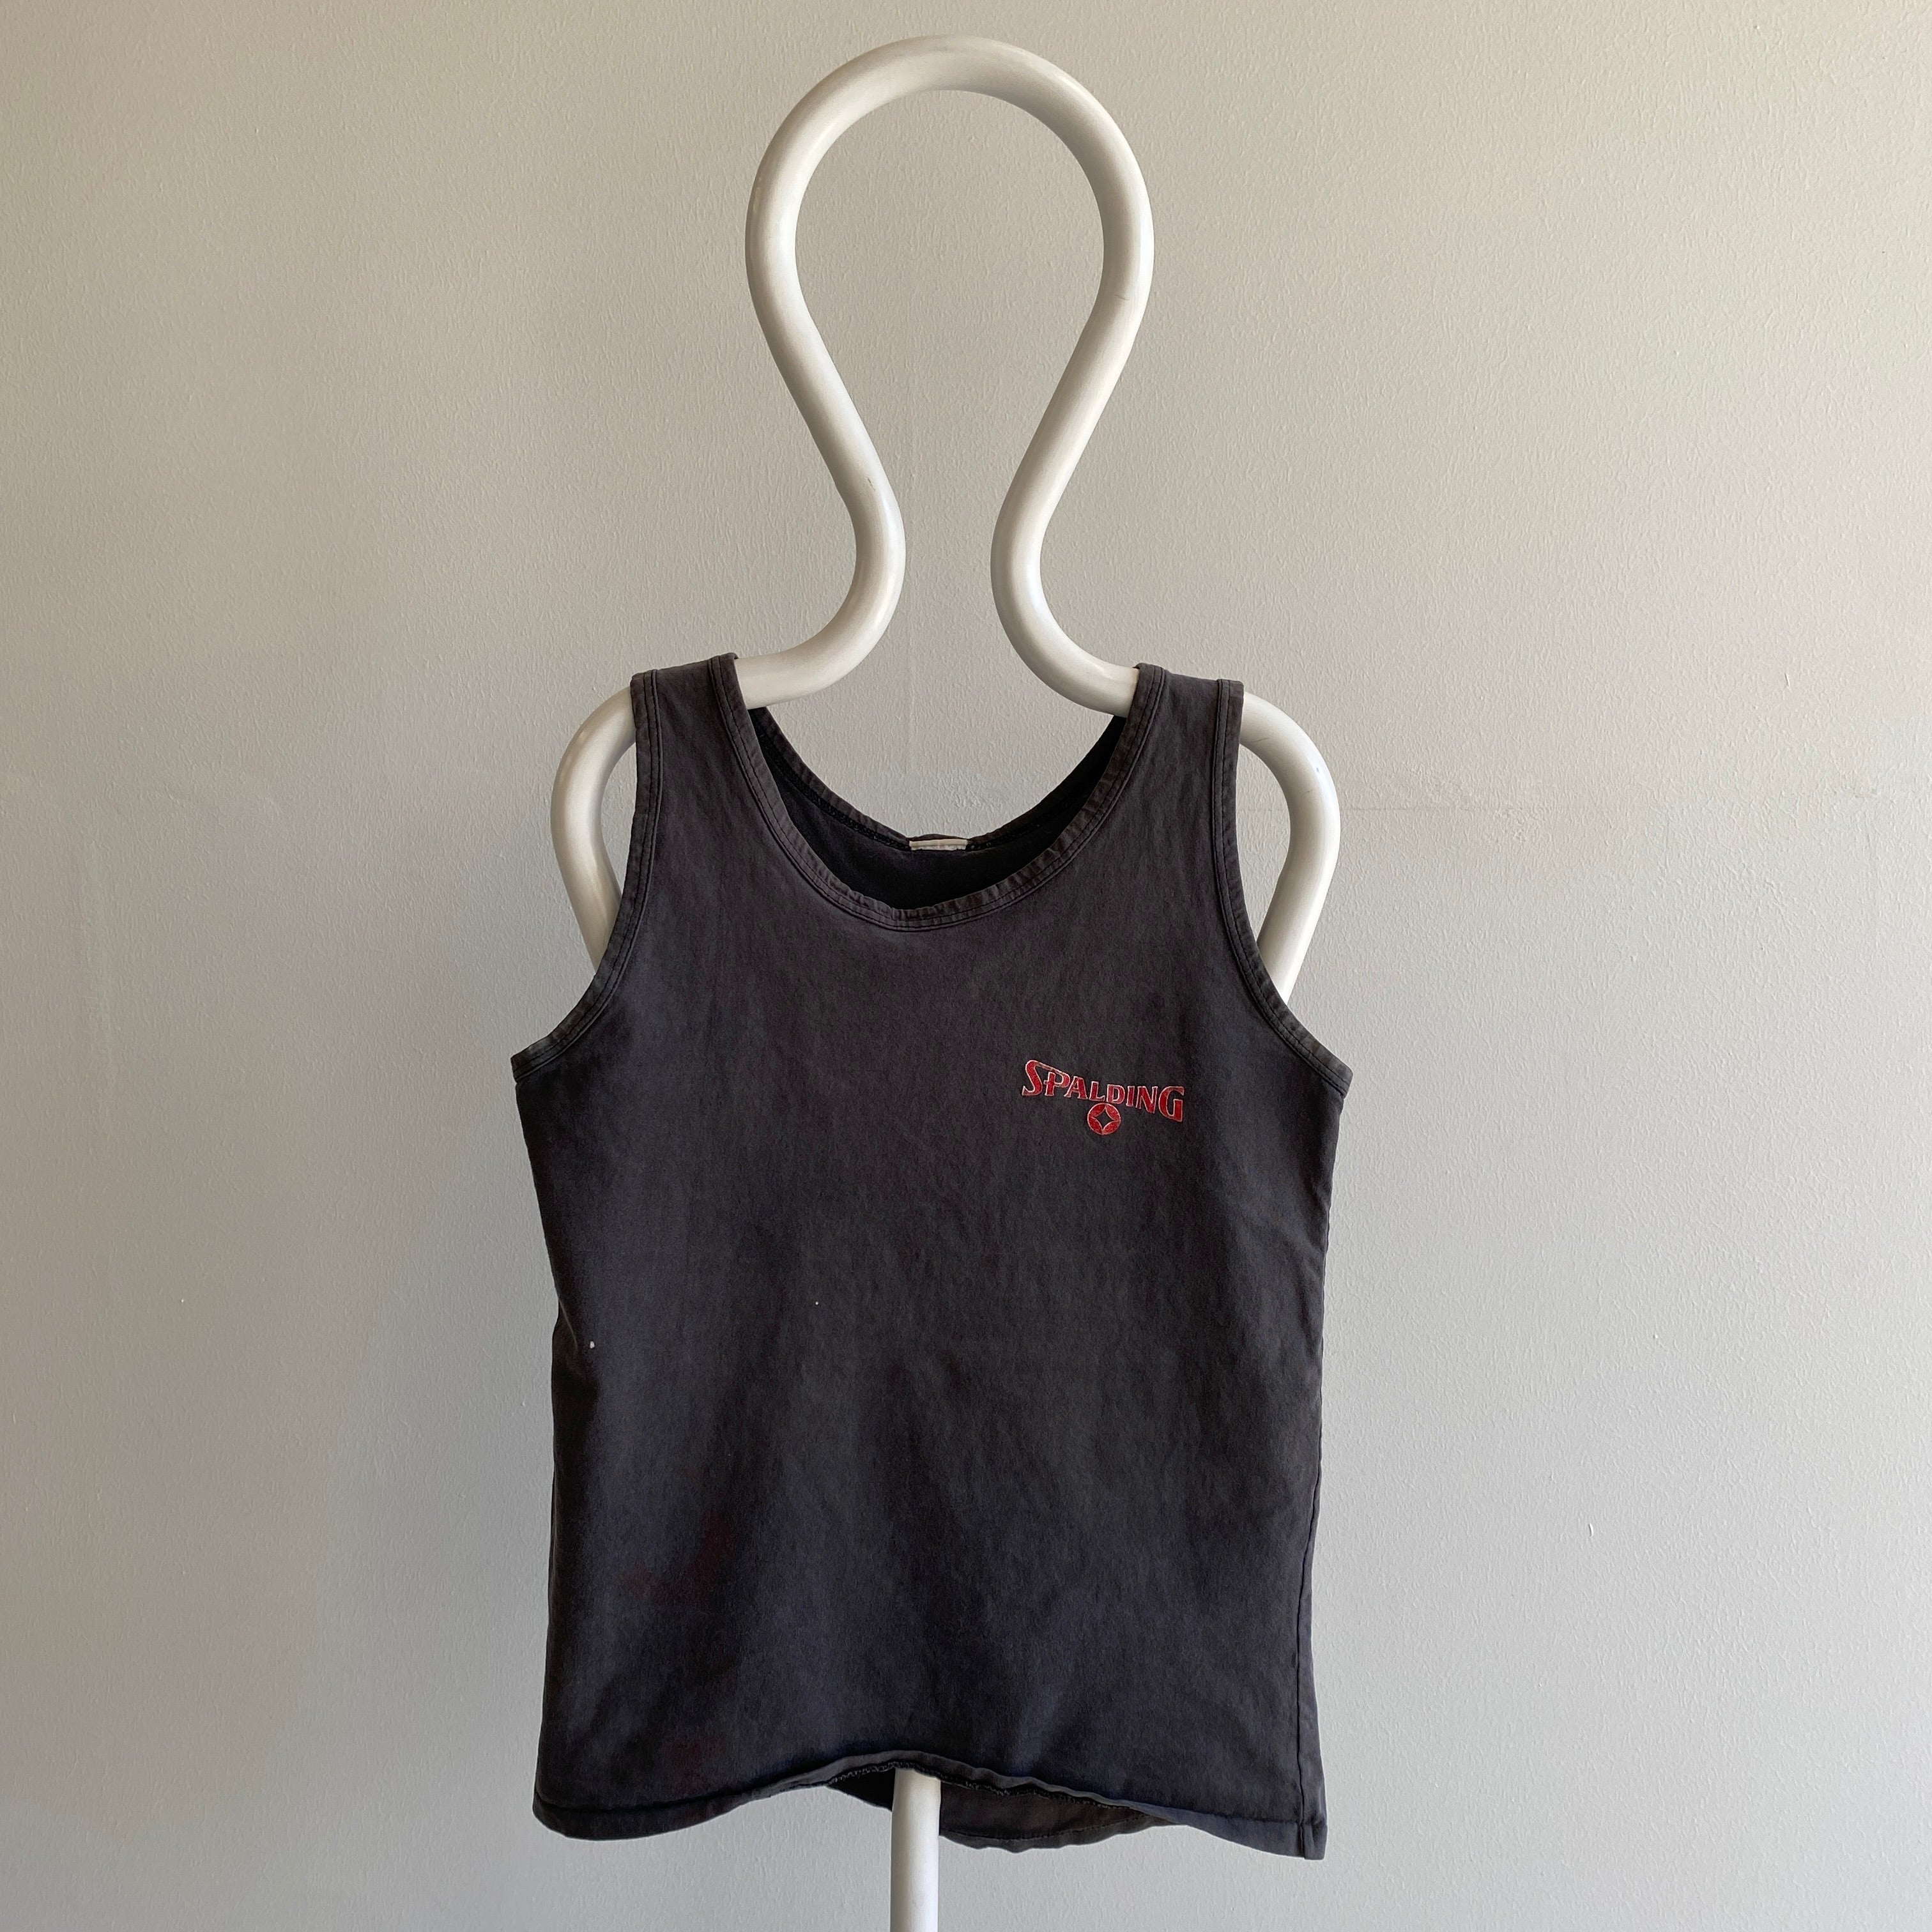 1980s Spaulding Smaller Size Ultra Faded Cotton Tank Top